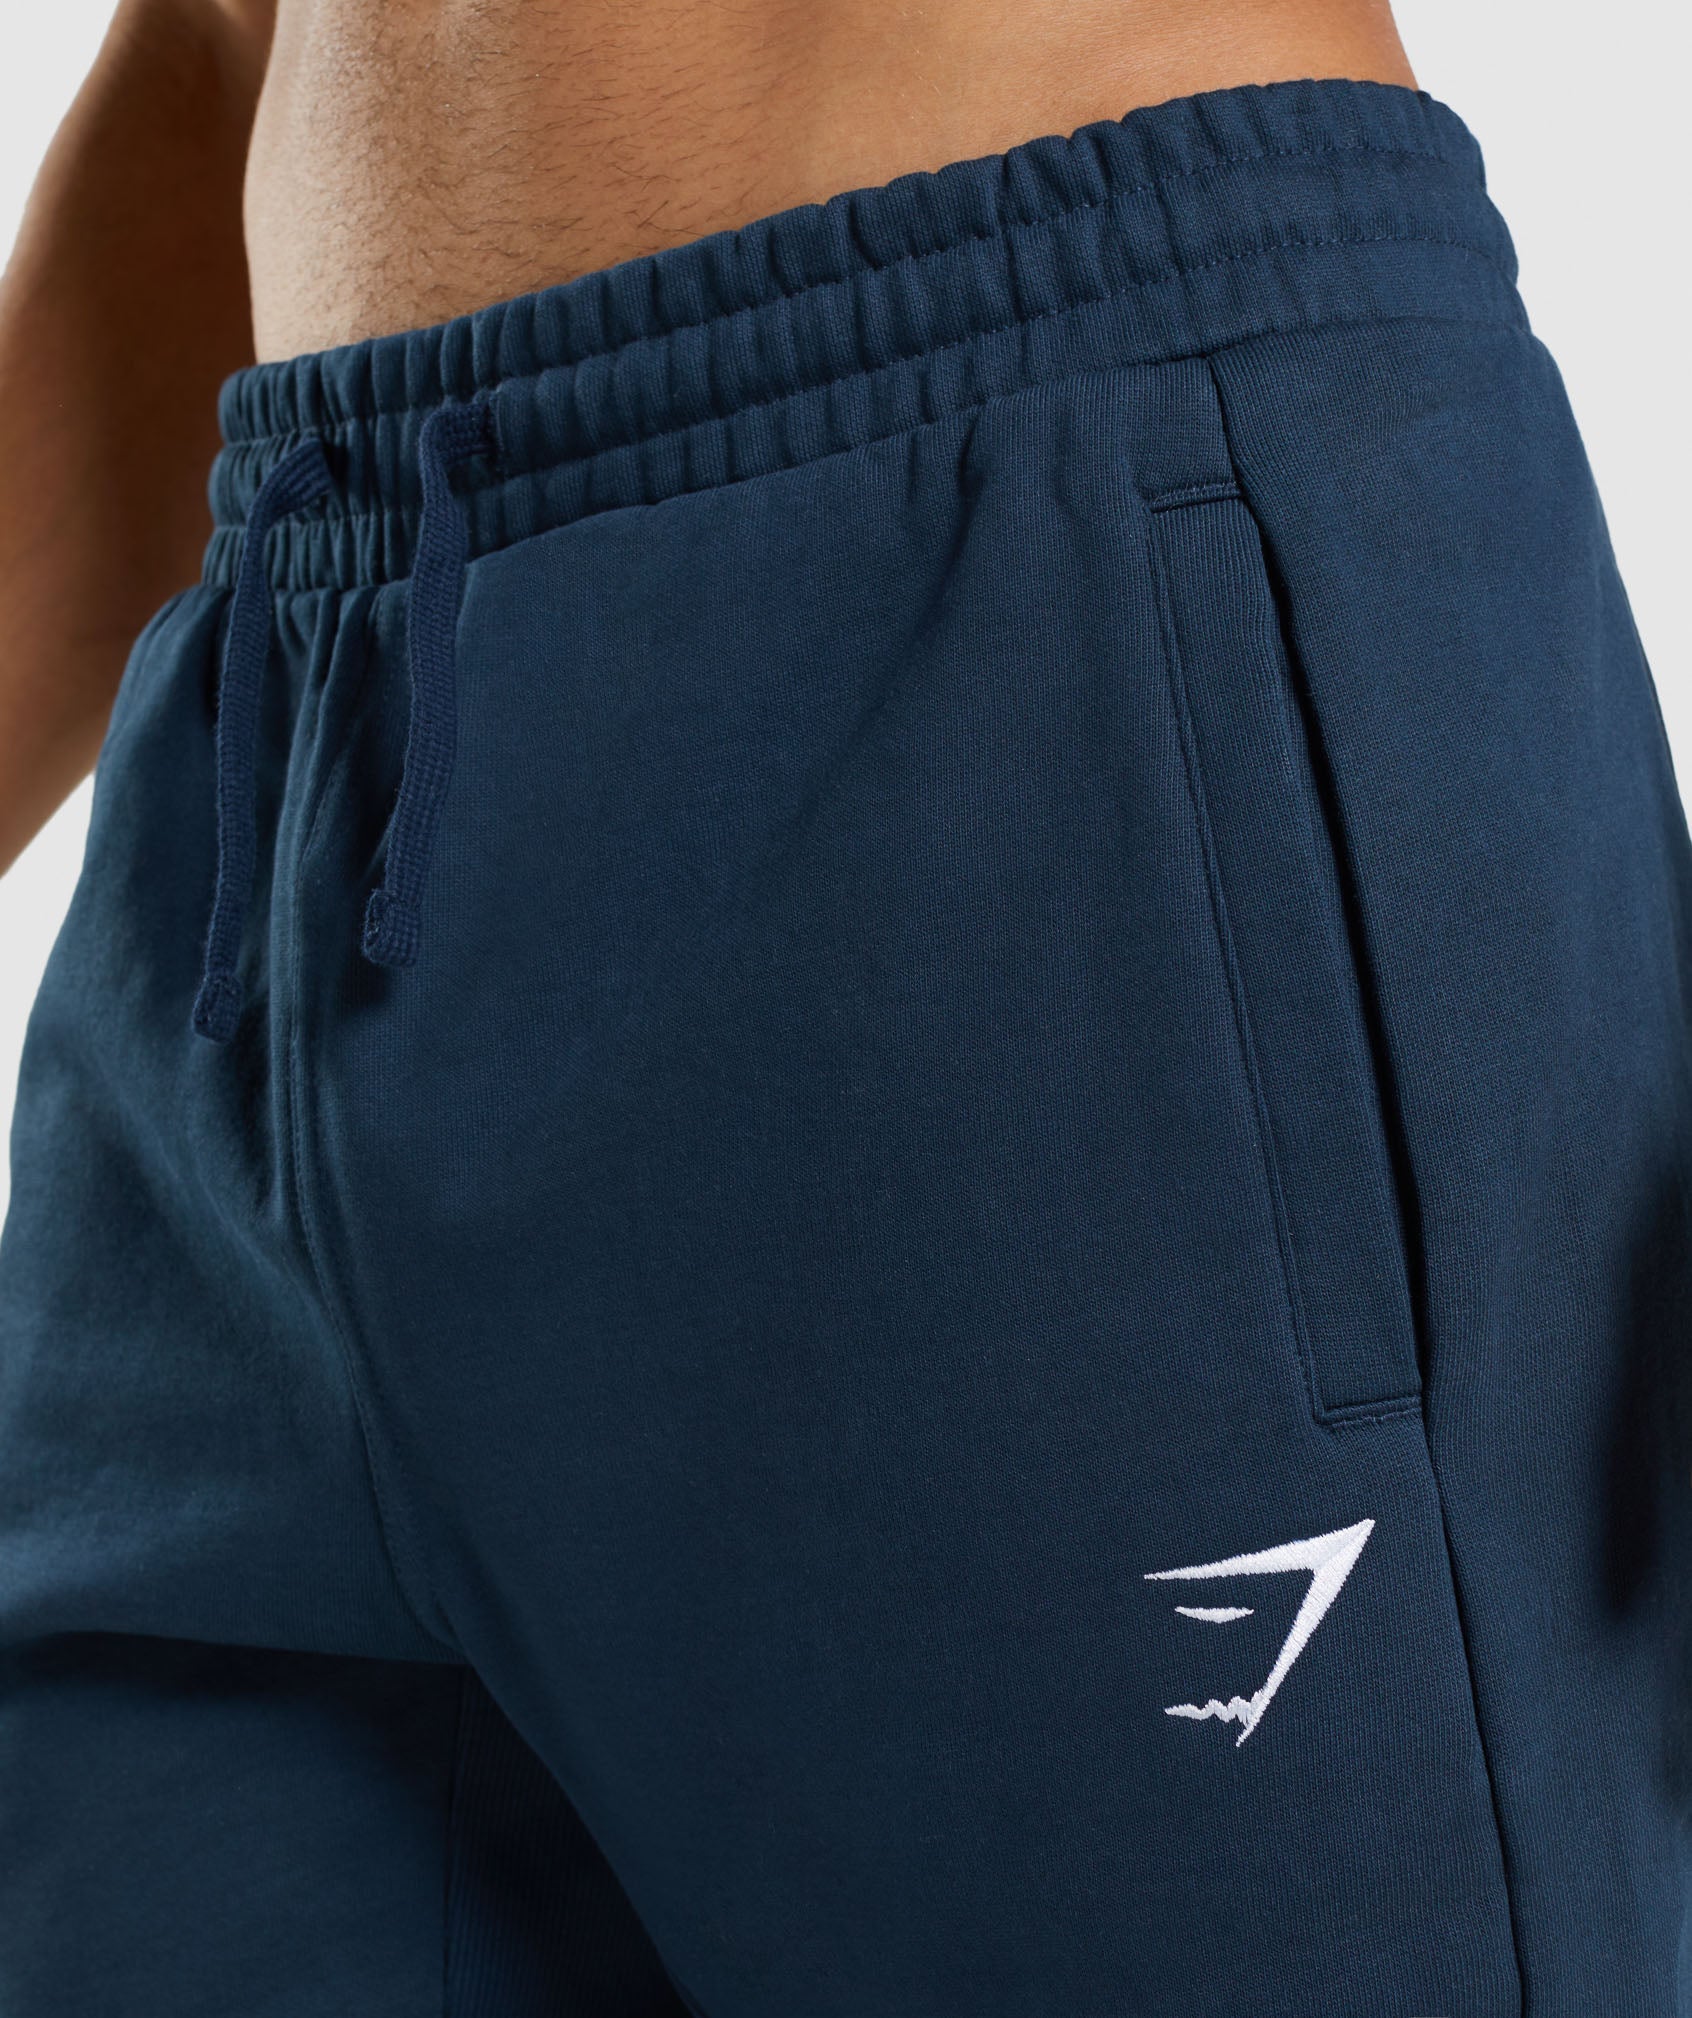 Essential Jogger in Navy - view 6